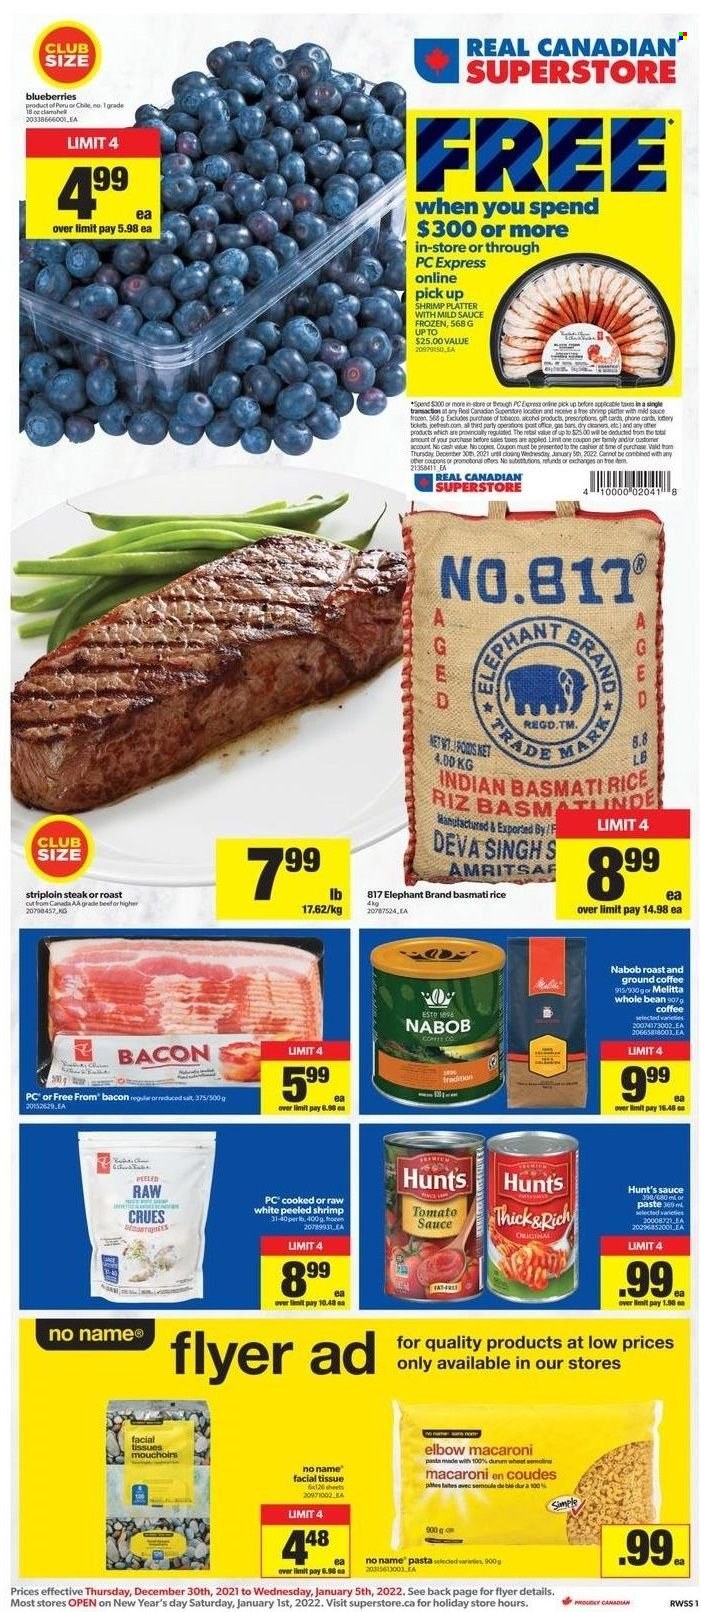 Real Canadian Superstore Flyer - December 30, 2021 - January 05, 2022 - Sales products - blueberries, No Name, macaroni, pasta, sauce, bacon, tomato sauce, basmati rice, rice, coffee, ground coffee, beef meat, striploin steak, tissues, facial tissues, platter, phone, steak. Page 1.